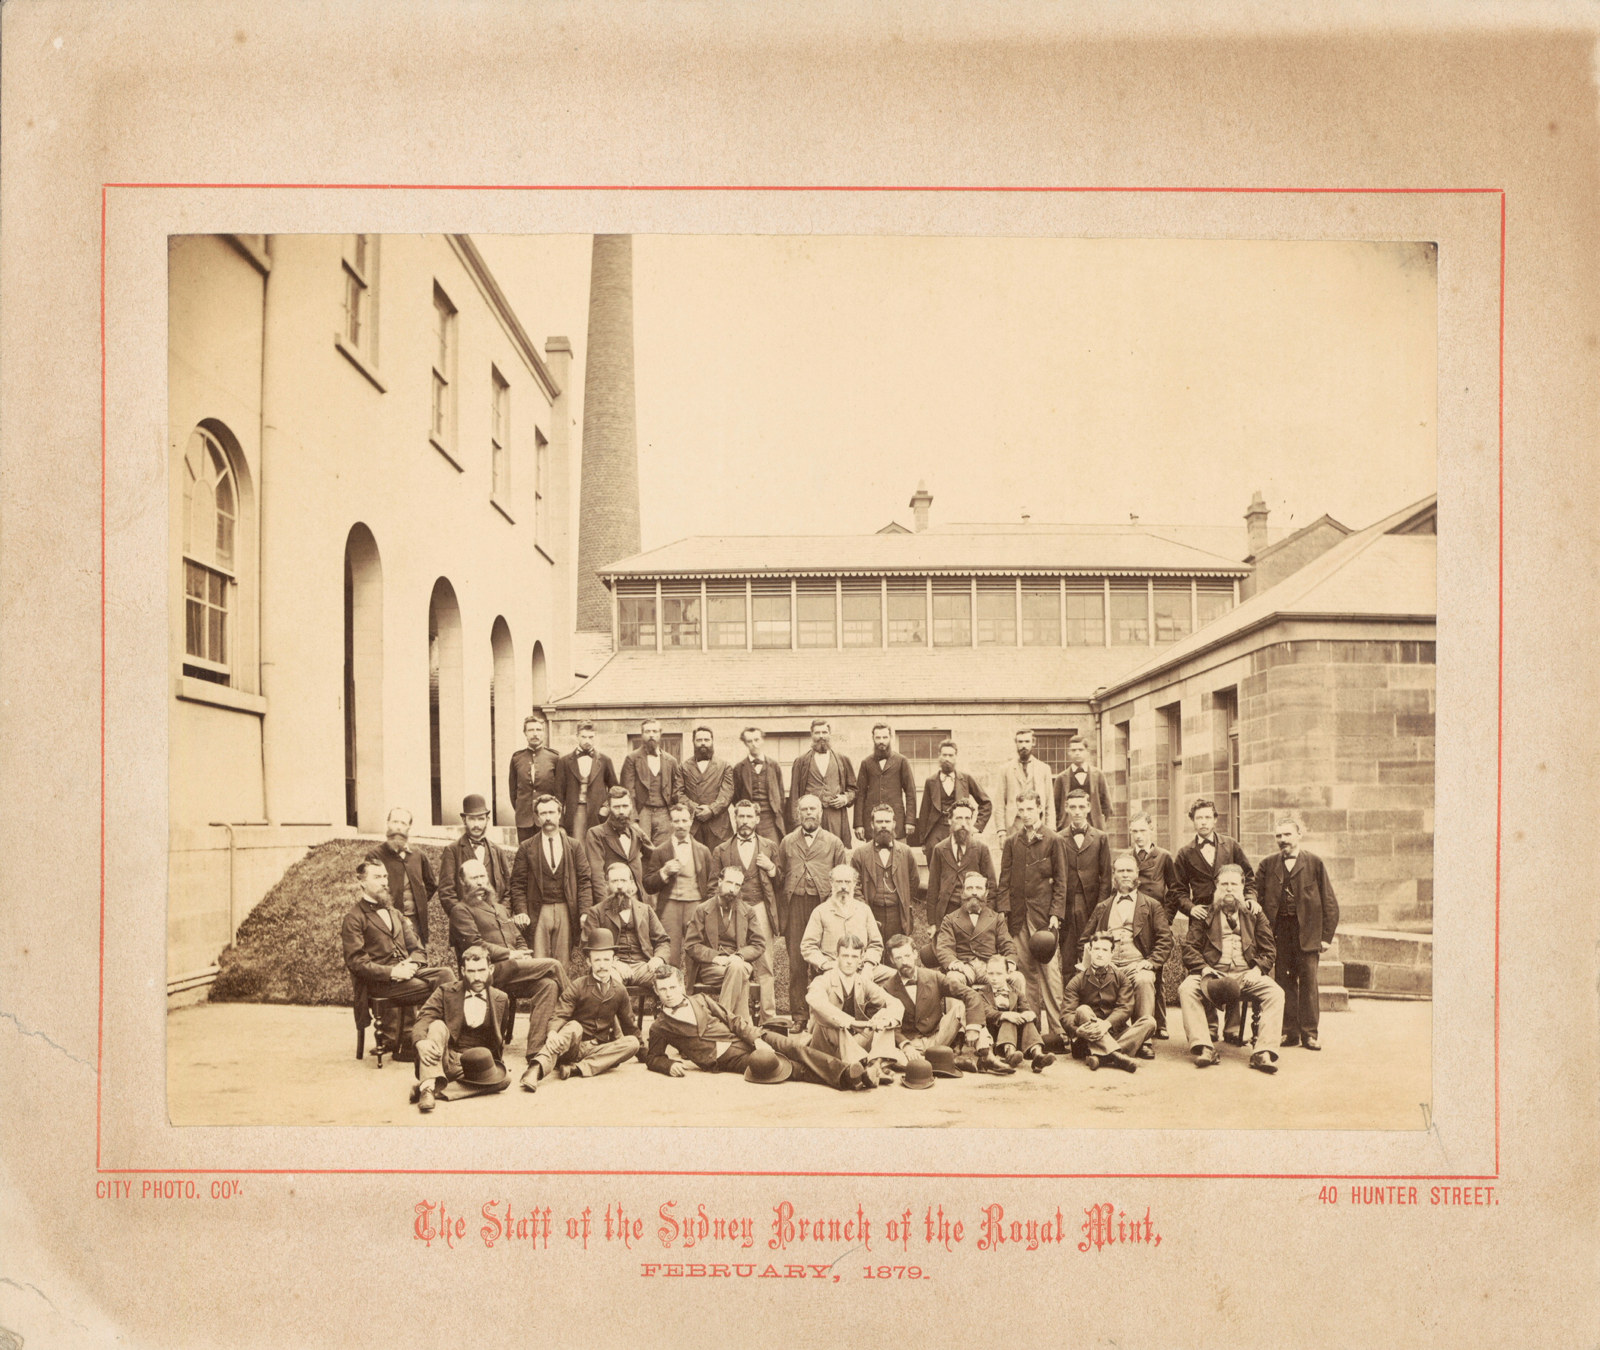 The staff of the Sydney Branch of the Royal Mint, February 1879